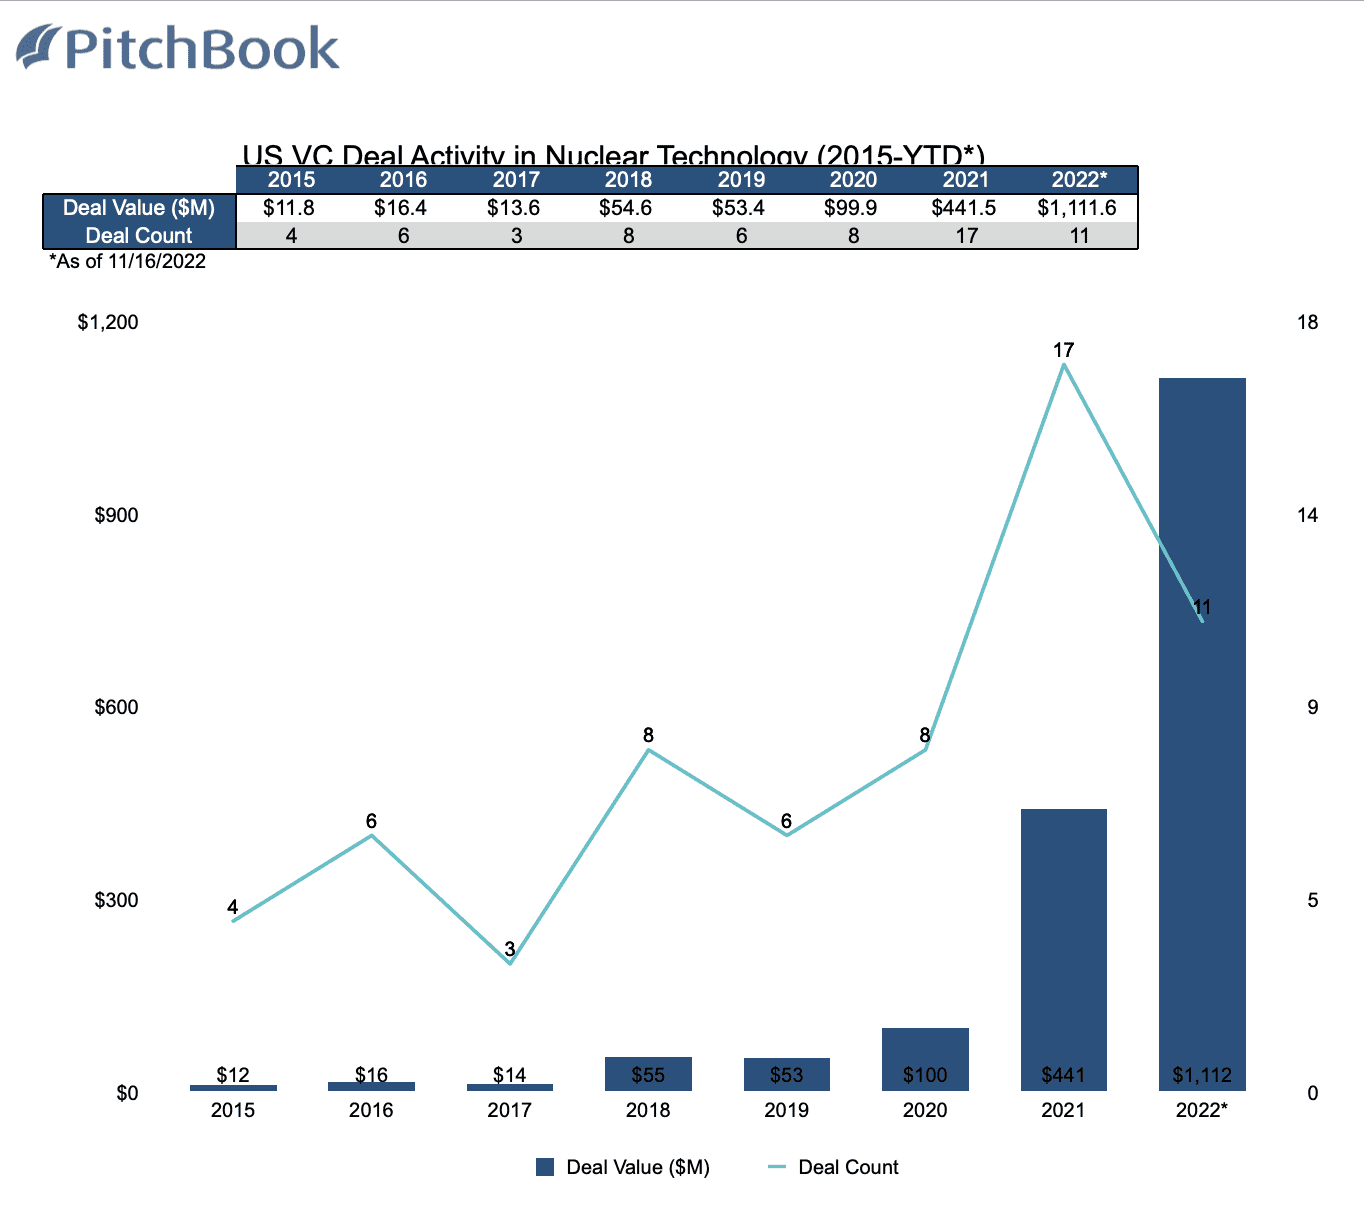 Pitchbook's private investment data for nuclear technology data includes both fusion and fission.